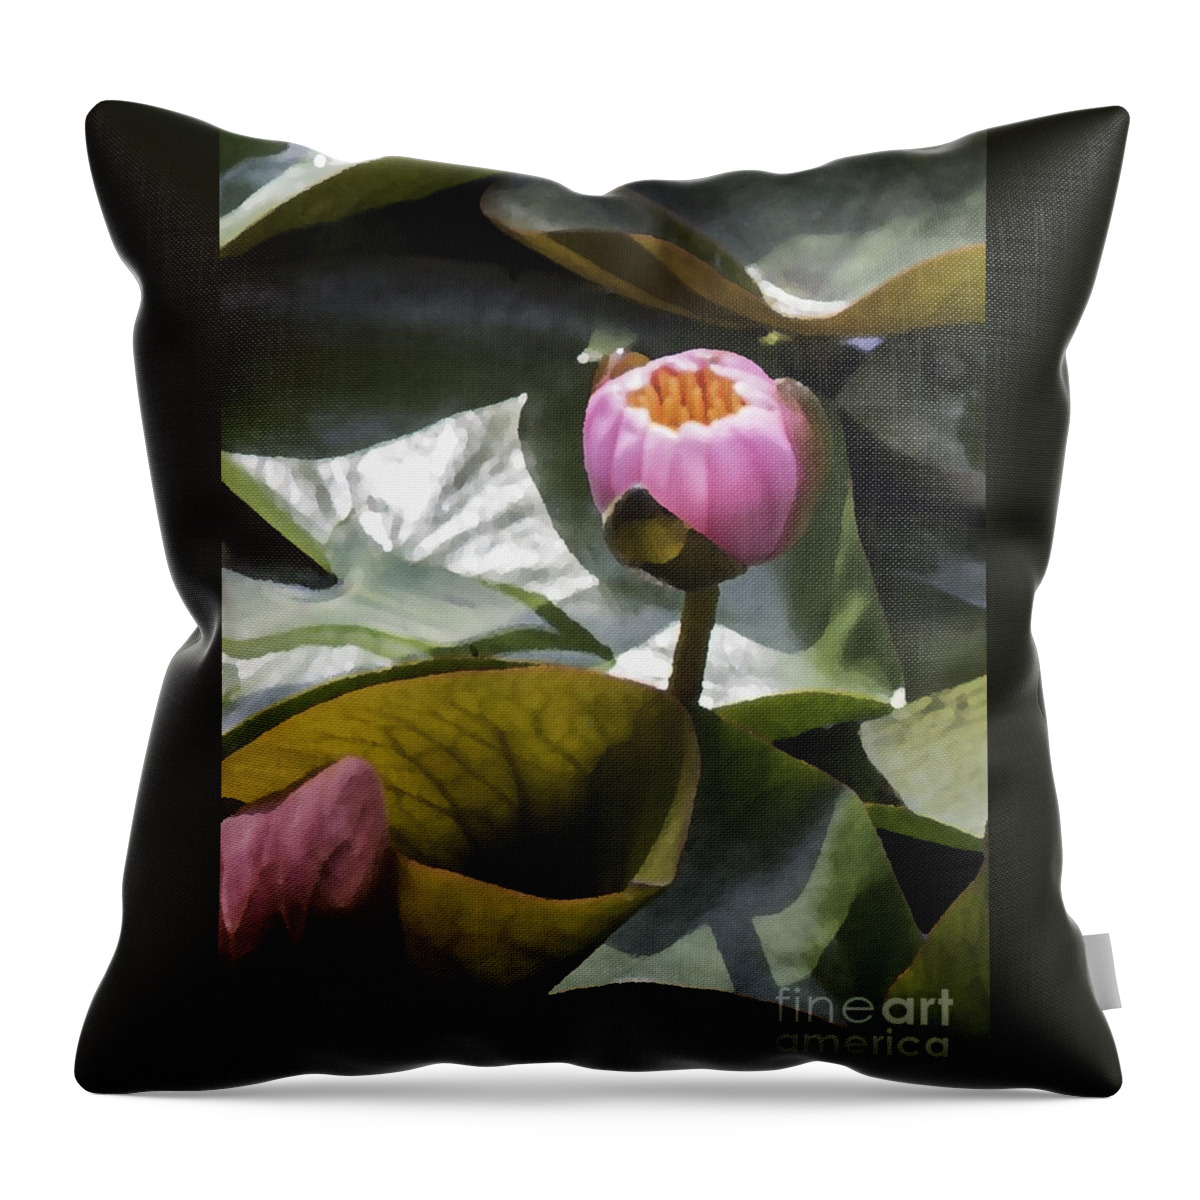 Lily Throw Pillow featuring the photograph Water Lily Bud by Arlene Carmel